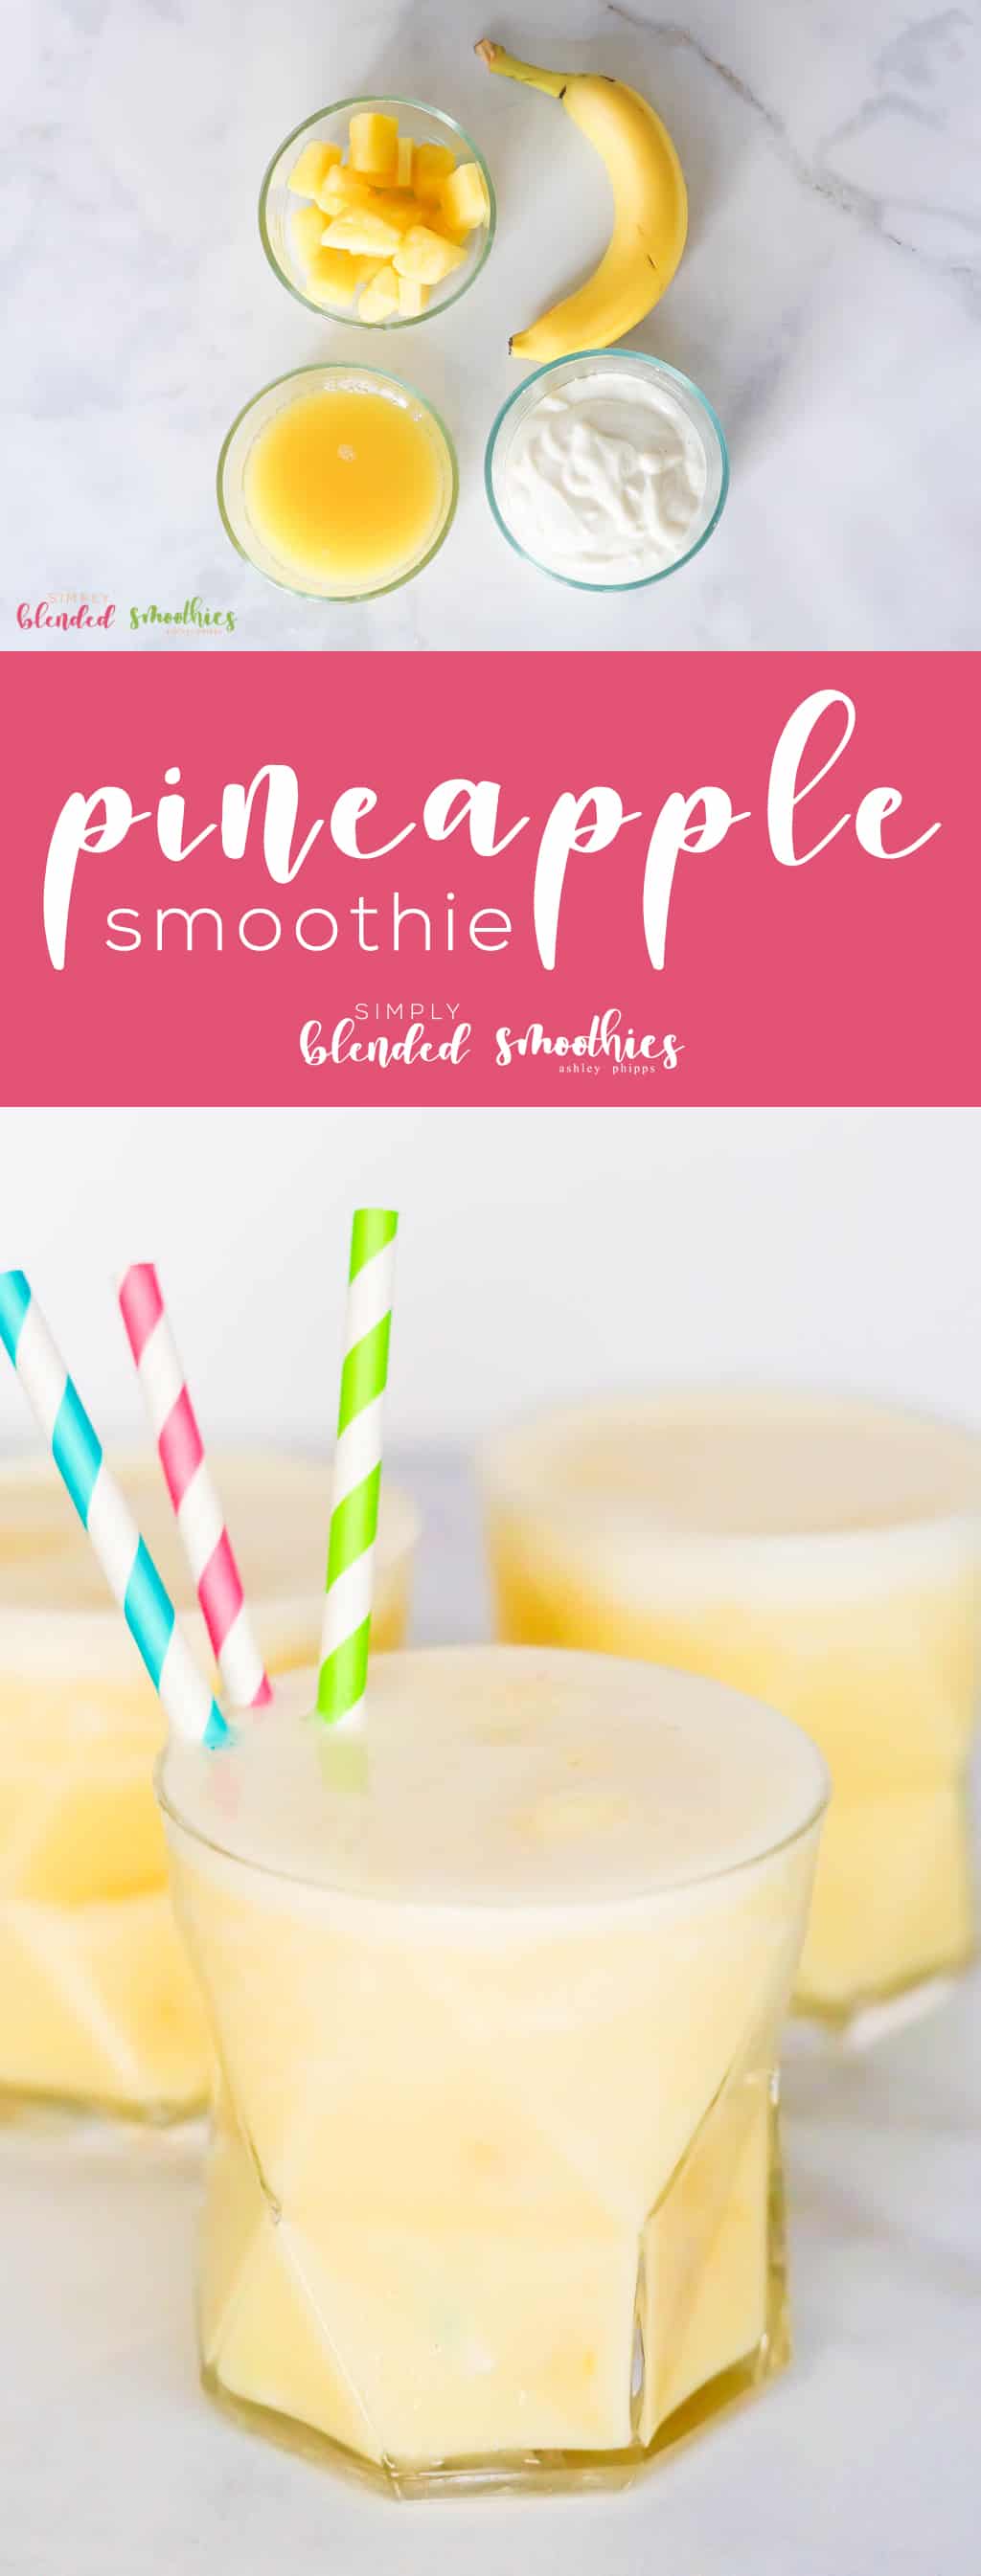 Pineapple Smoothie - This Healthy Smoothie Recipe Is Refreshing And Will Have You Feeling Like You'Re Sitting At The Beach